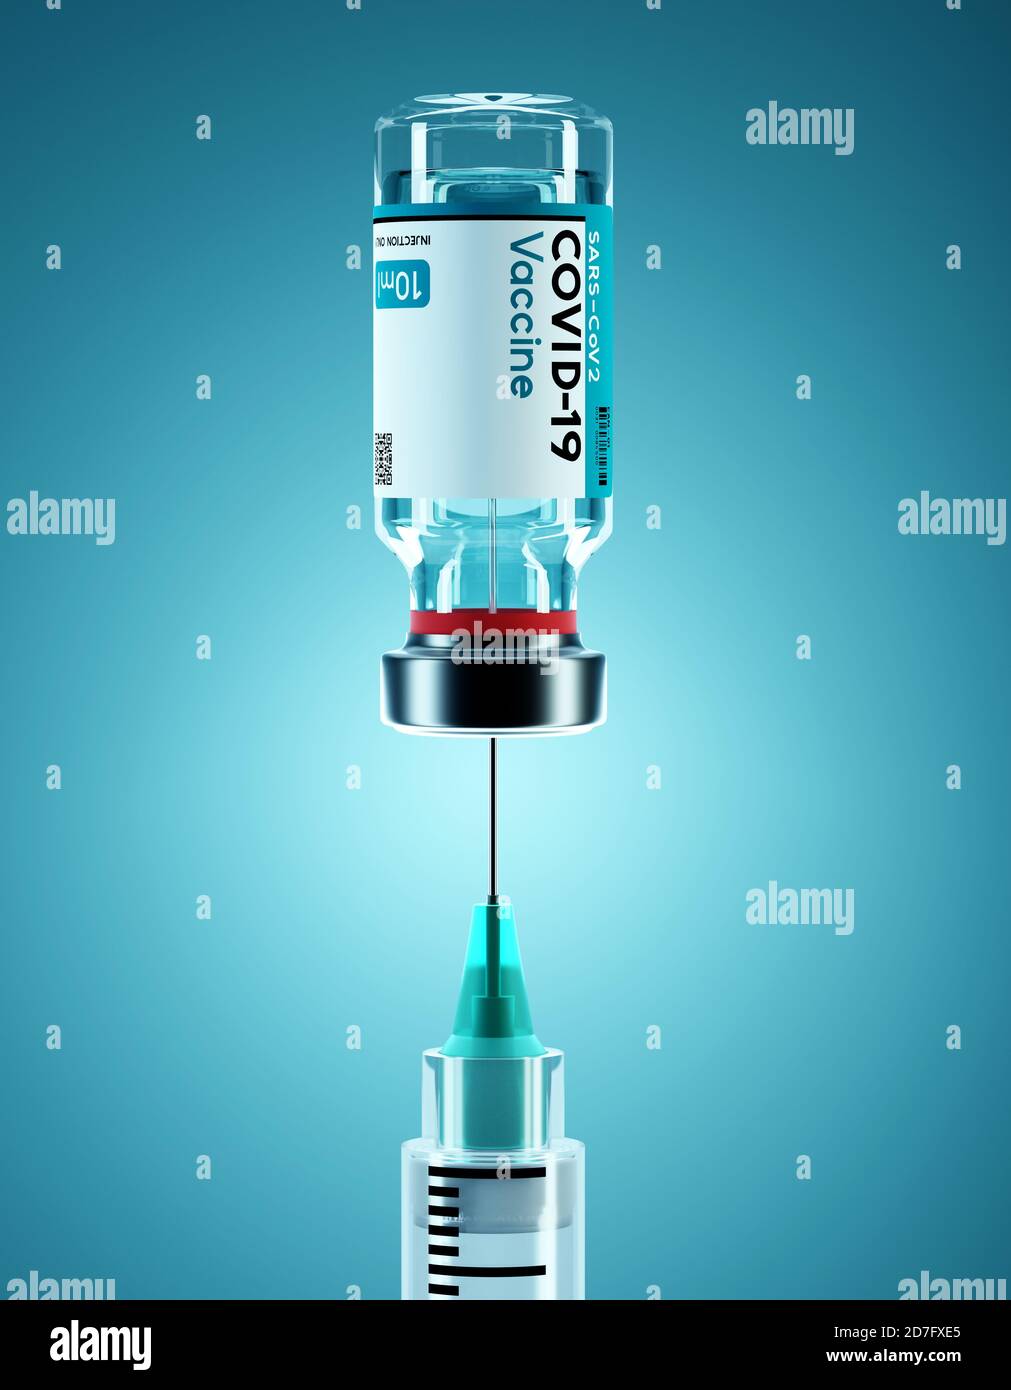 SARS - CoV2 Vaccine concept. A medical needle entering into a glass vial of COVID-19 Vaccine. Medical research 3D illustration. Stock Photo